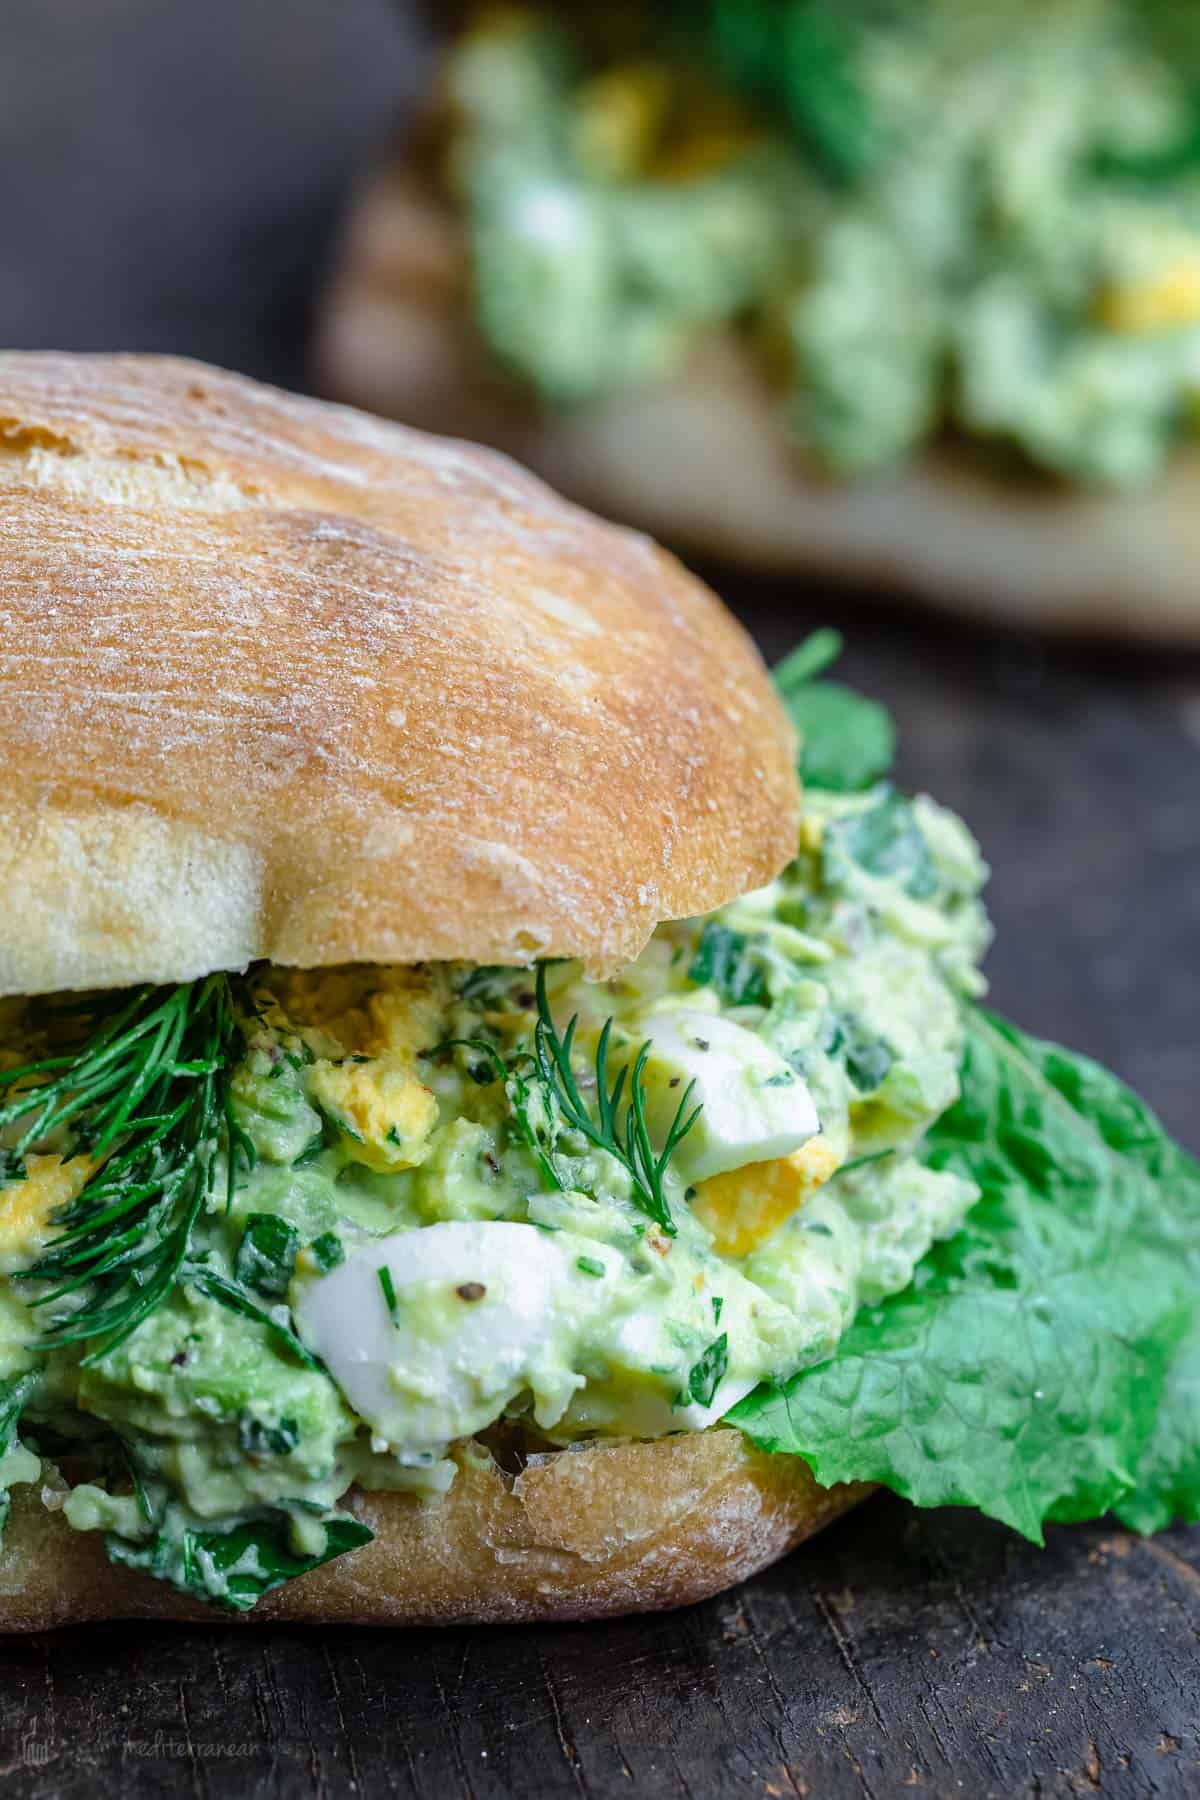 Avocado egg salad sandwich with lettuce and dill